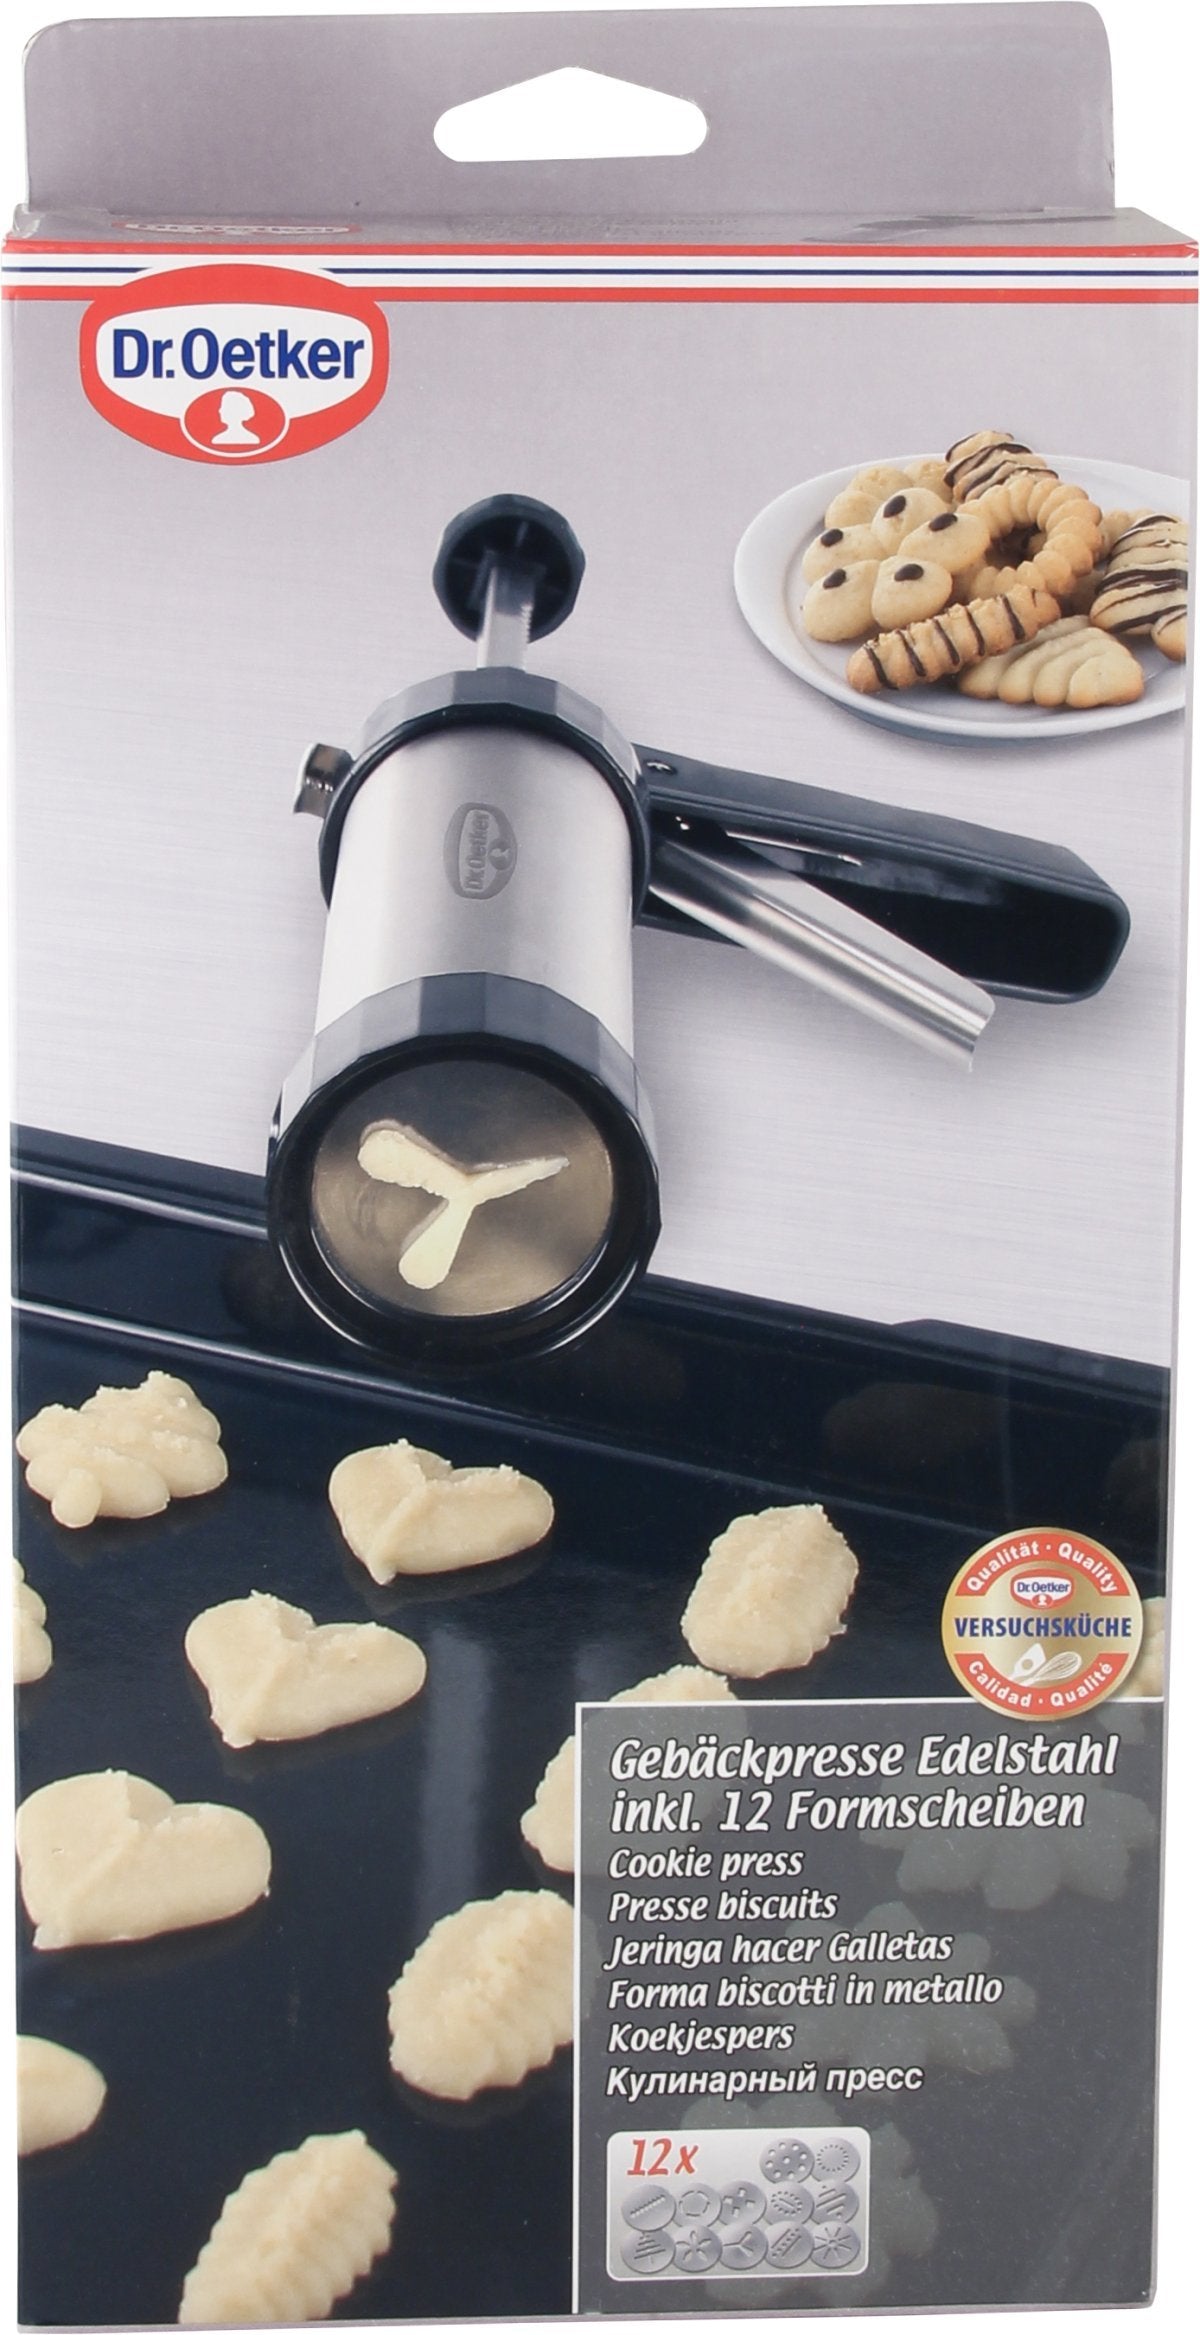 Dr.Oetker Stainless Steel Cookie Press With 12 Forming Moulds